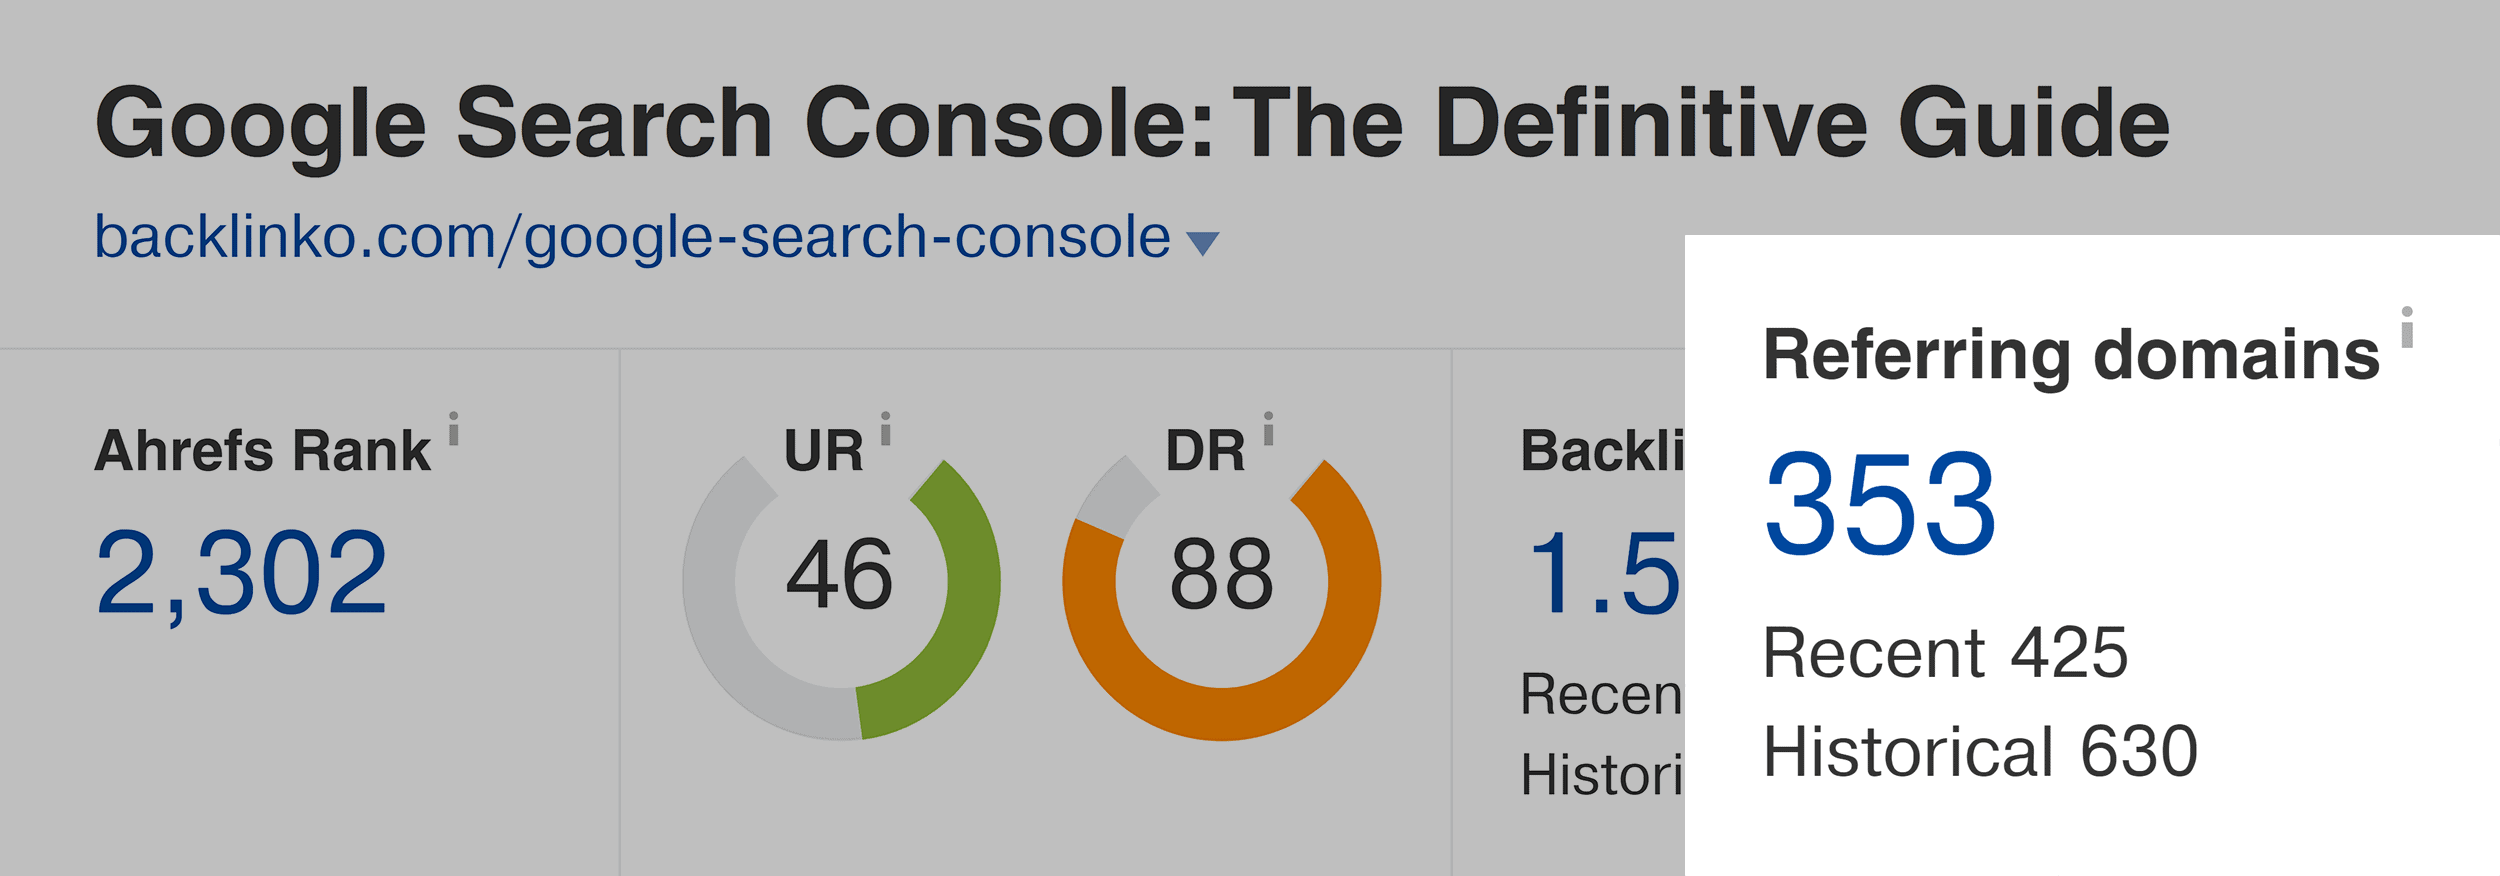 Ahrefs – Google Search Console – Referring domains